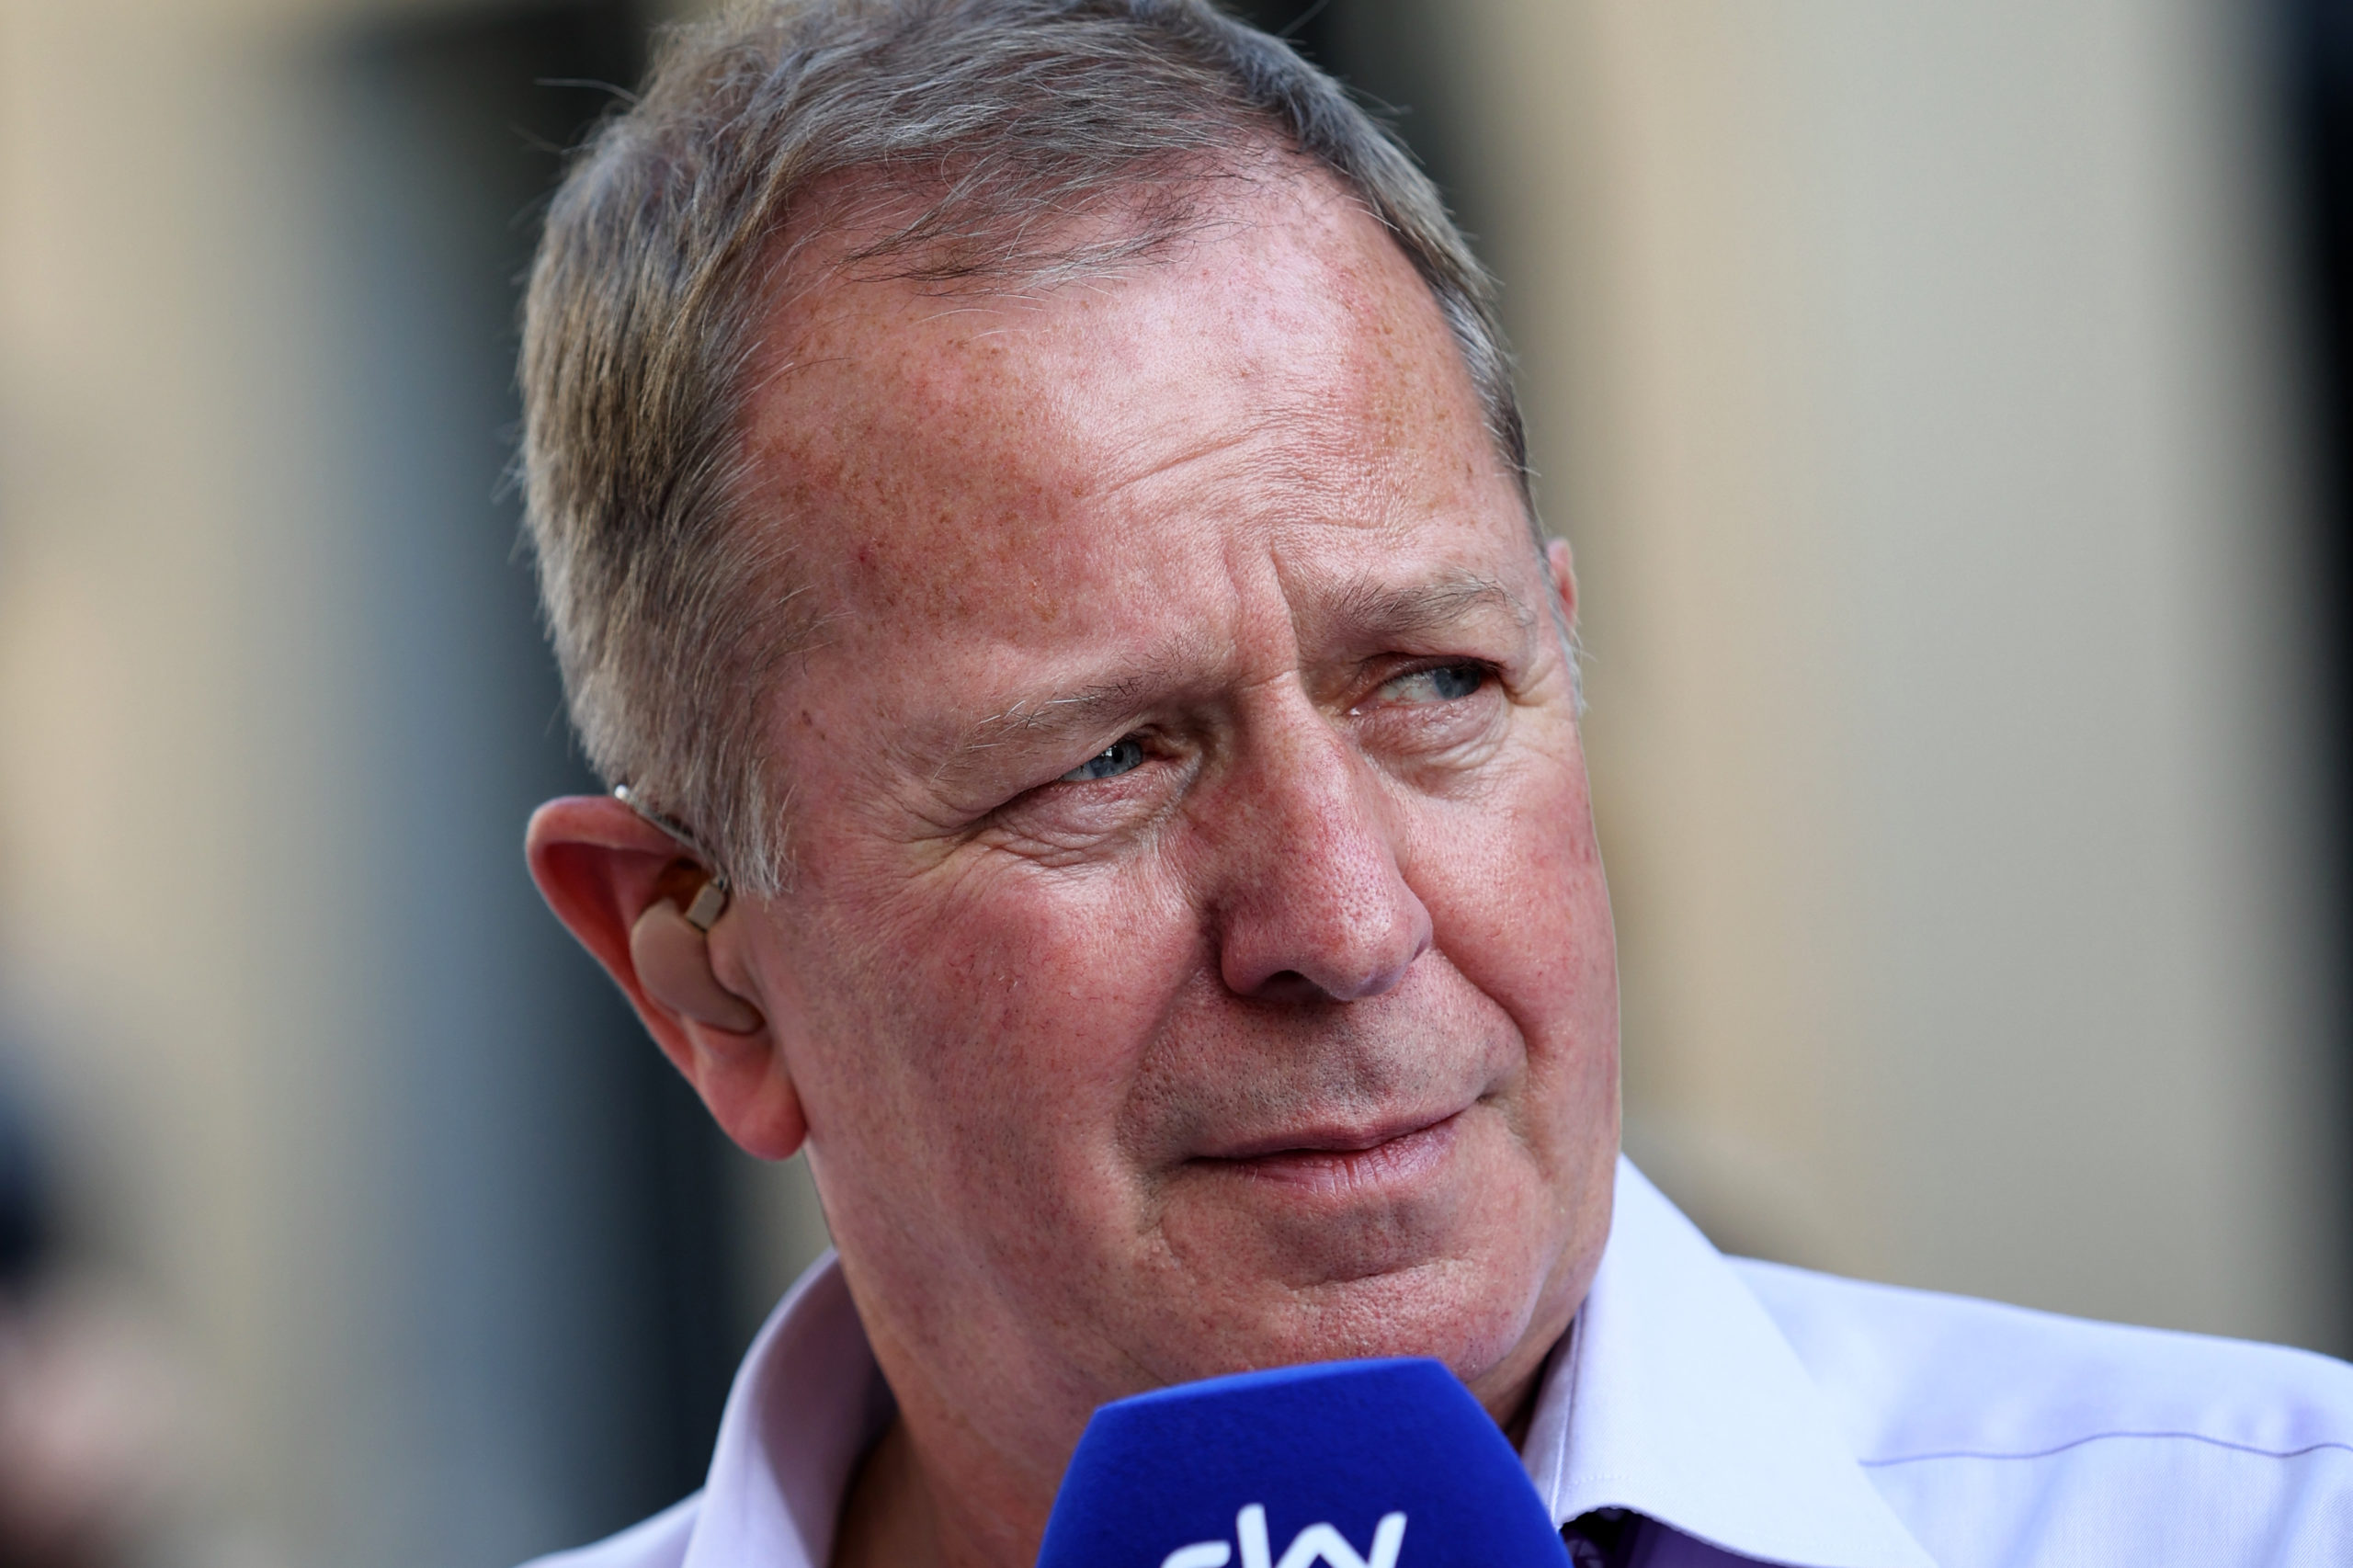 Martin Brundle is the inaugural winner of the Murray Walker Award